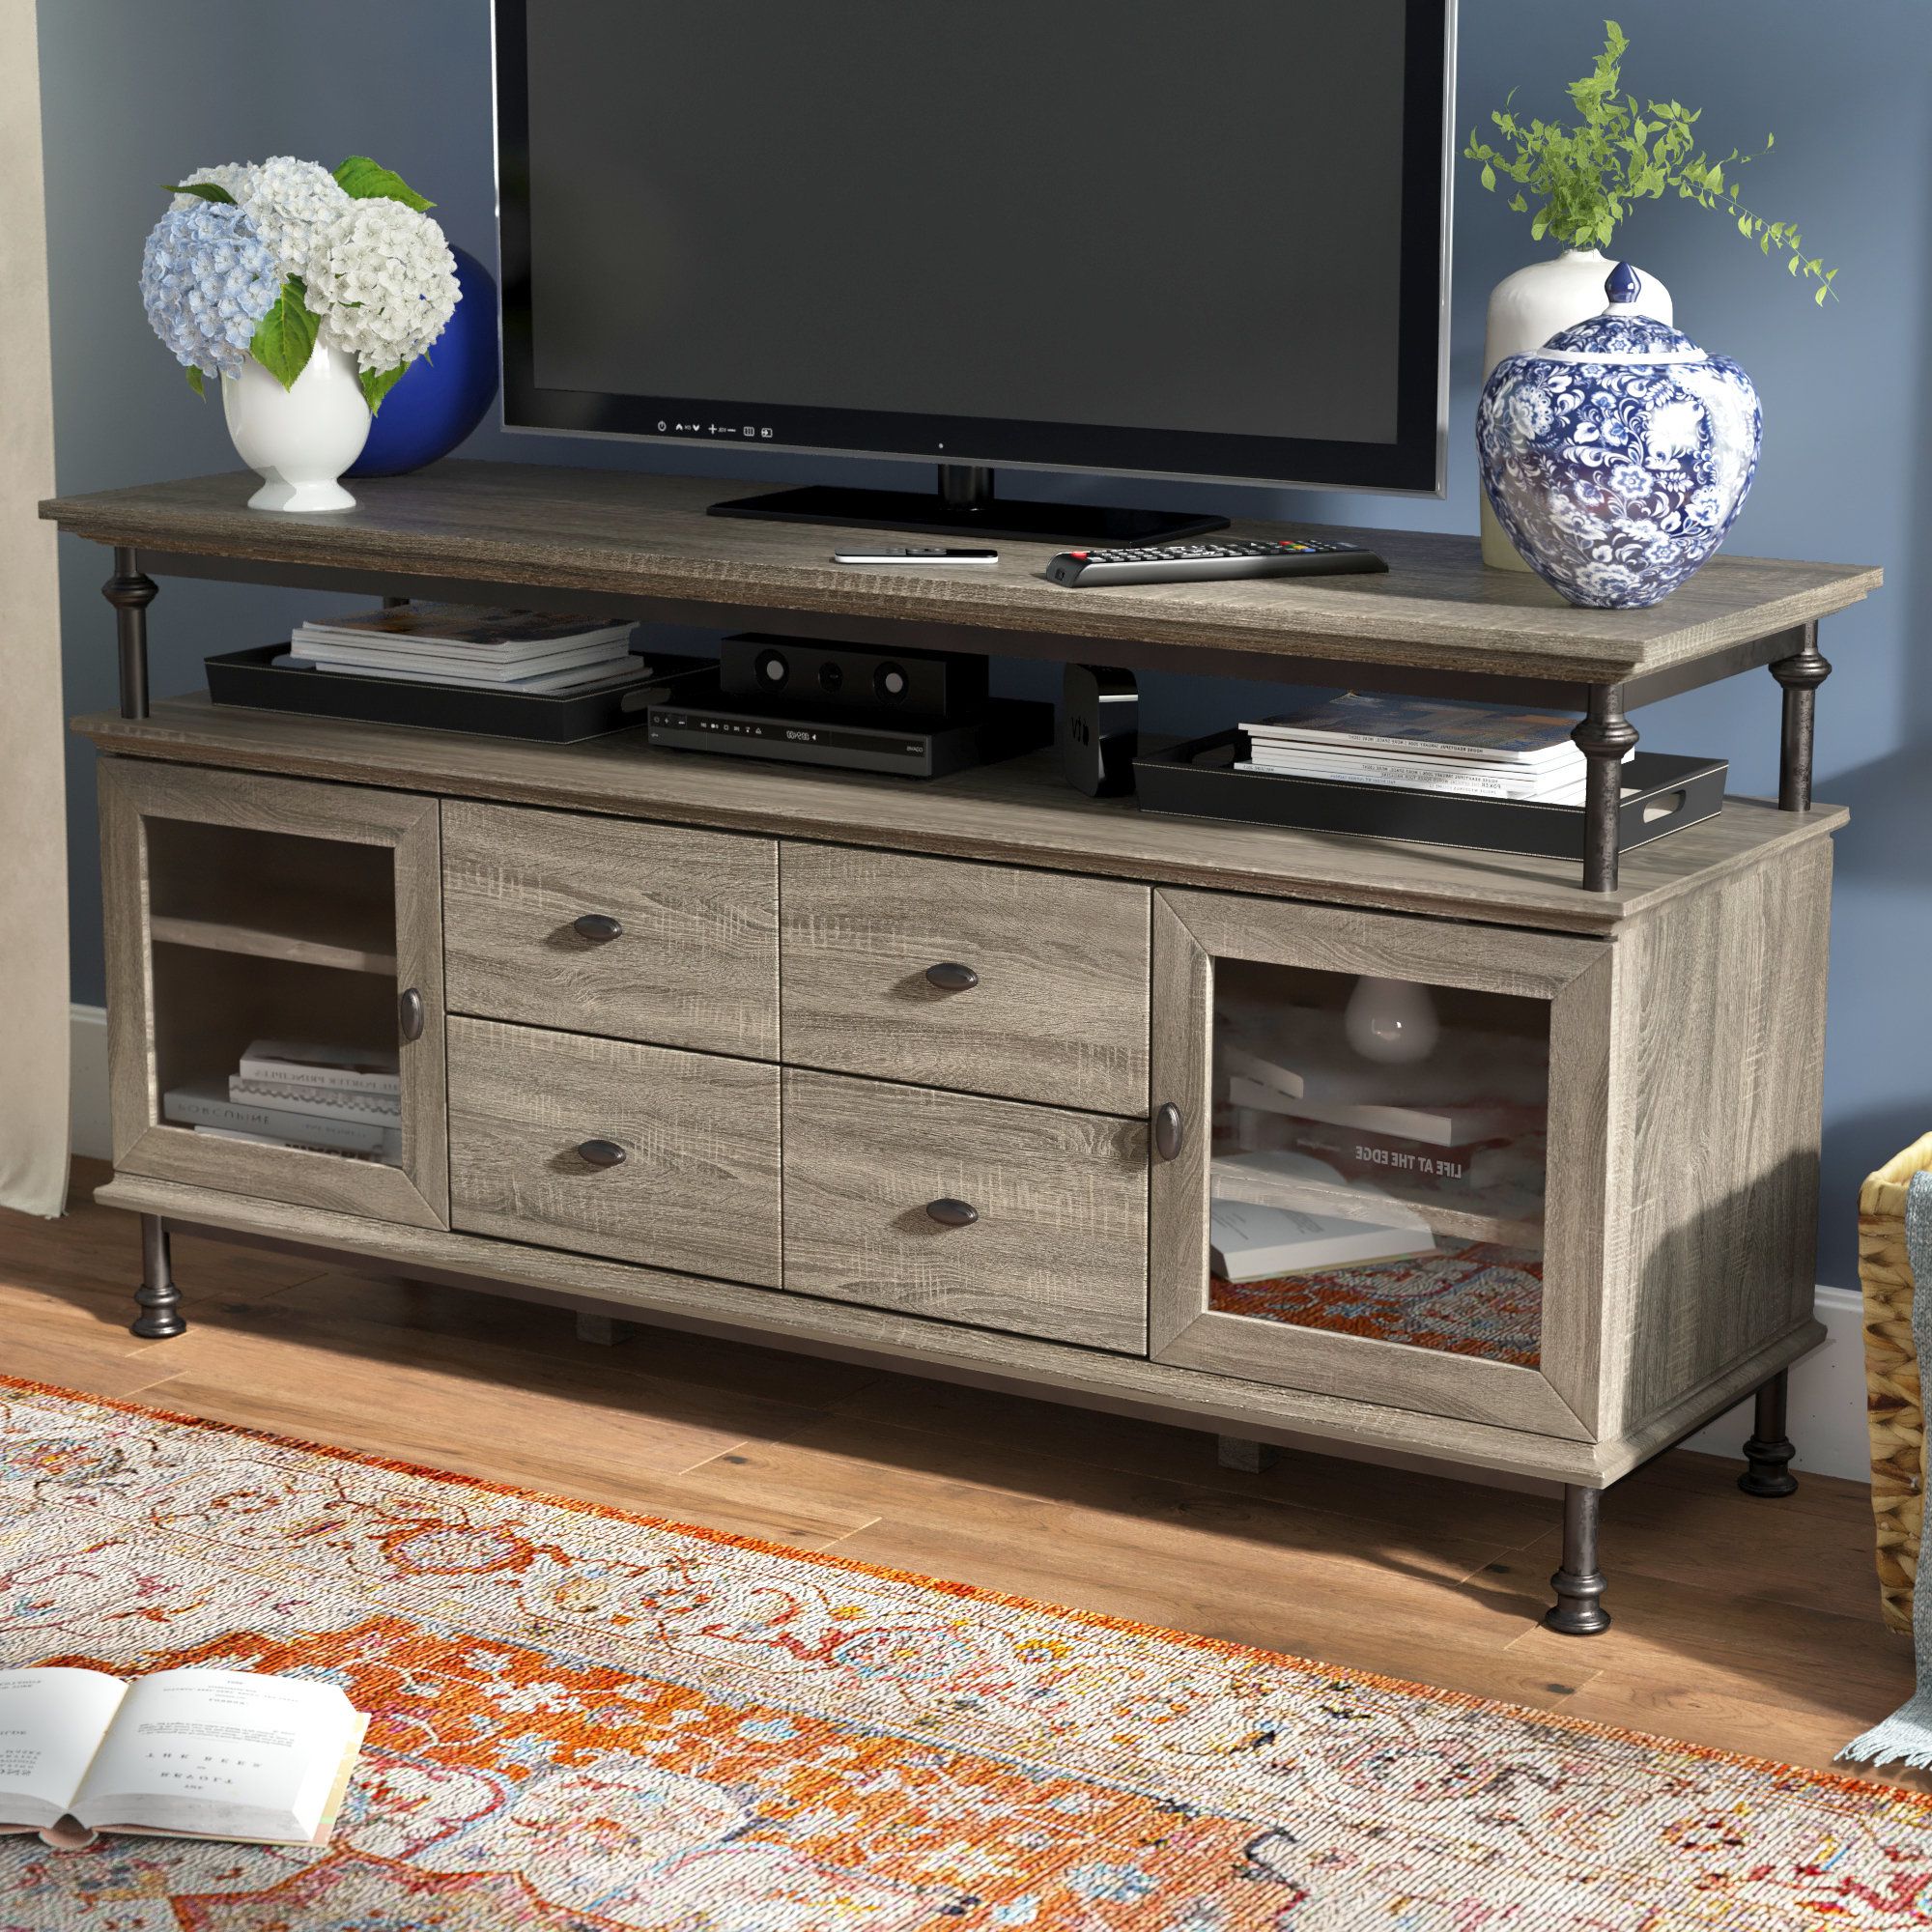 Most Recent Coffee Table And Tv Unit Sets Throughout Tv Buffet Stand (View 17 of 20)